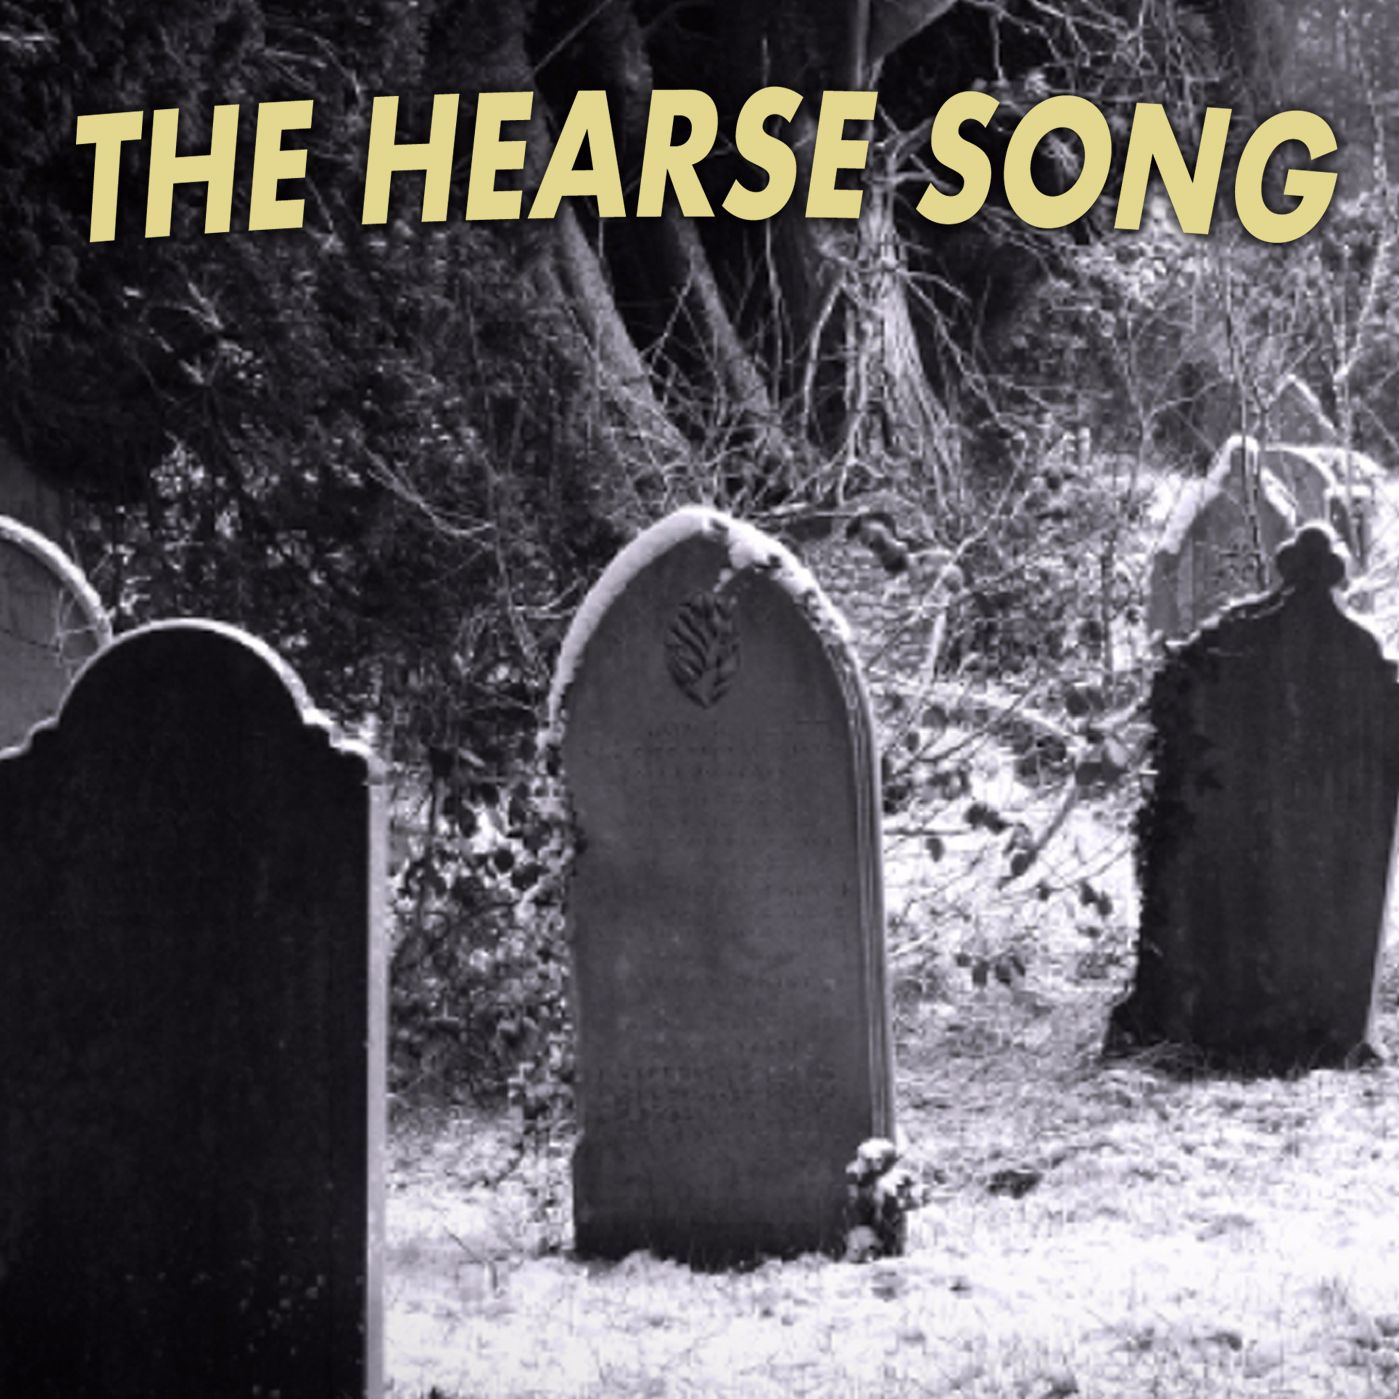 Unduh The Hearse Song